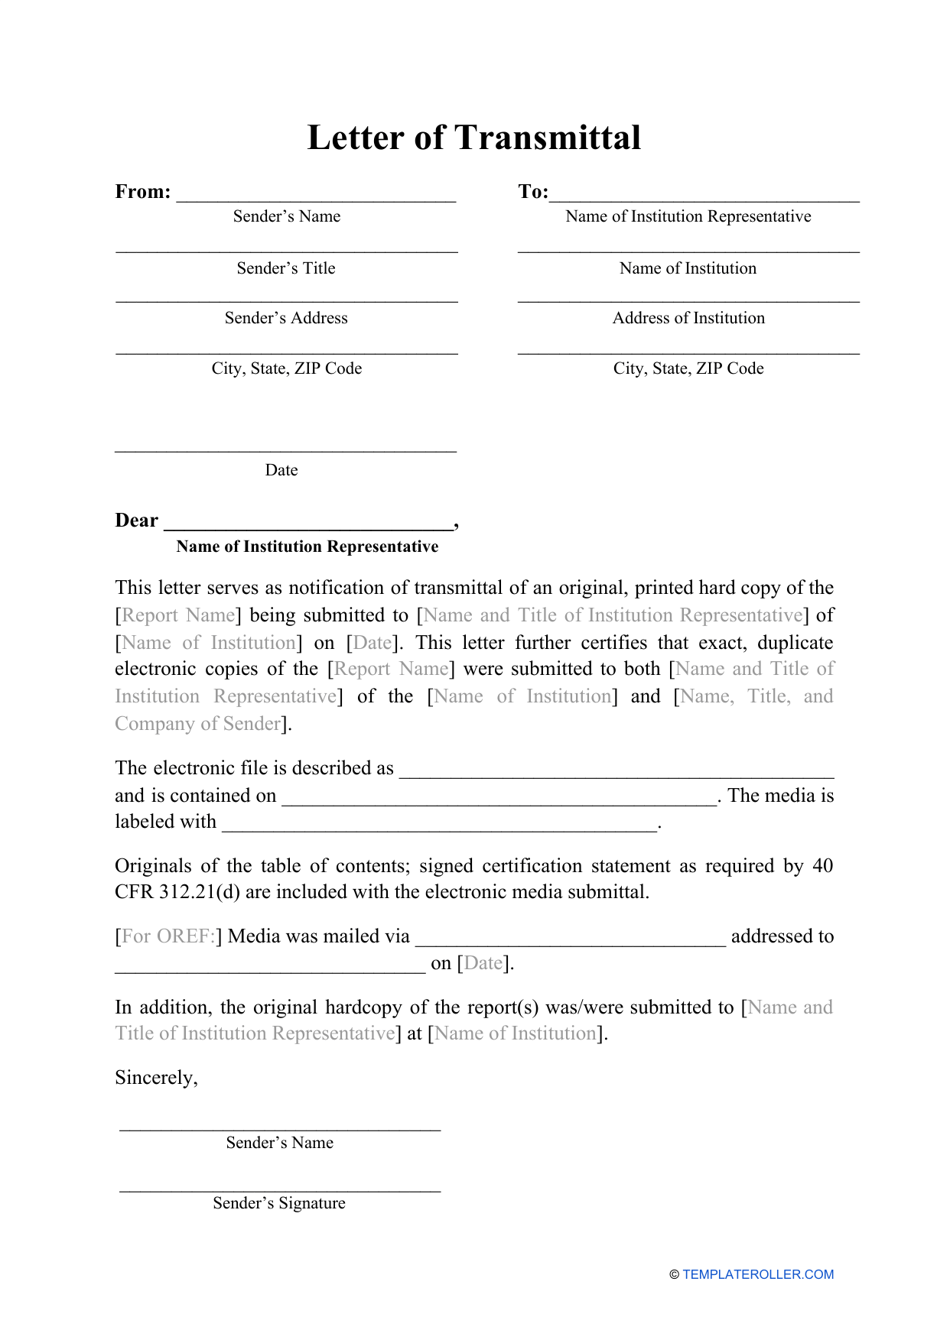 printable-transmittal-form-printable-word-searches